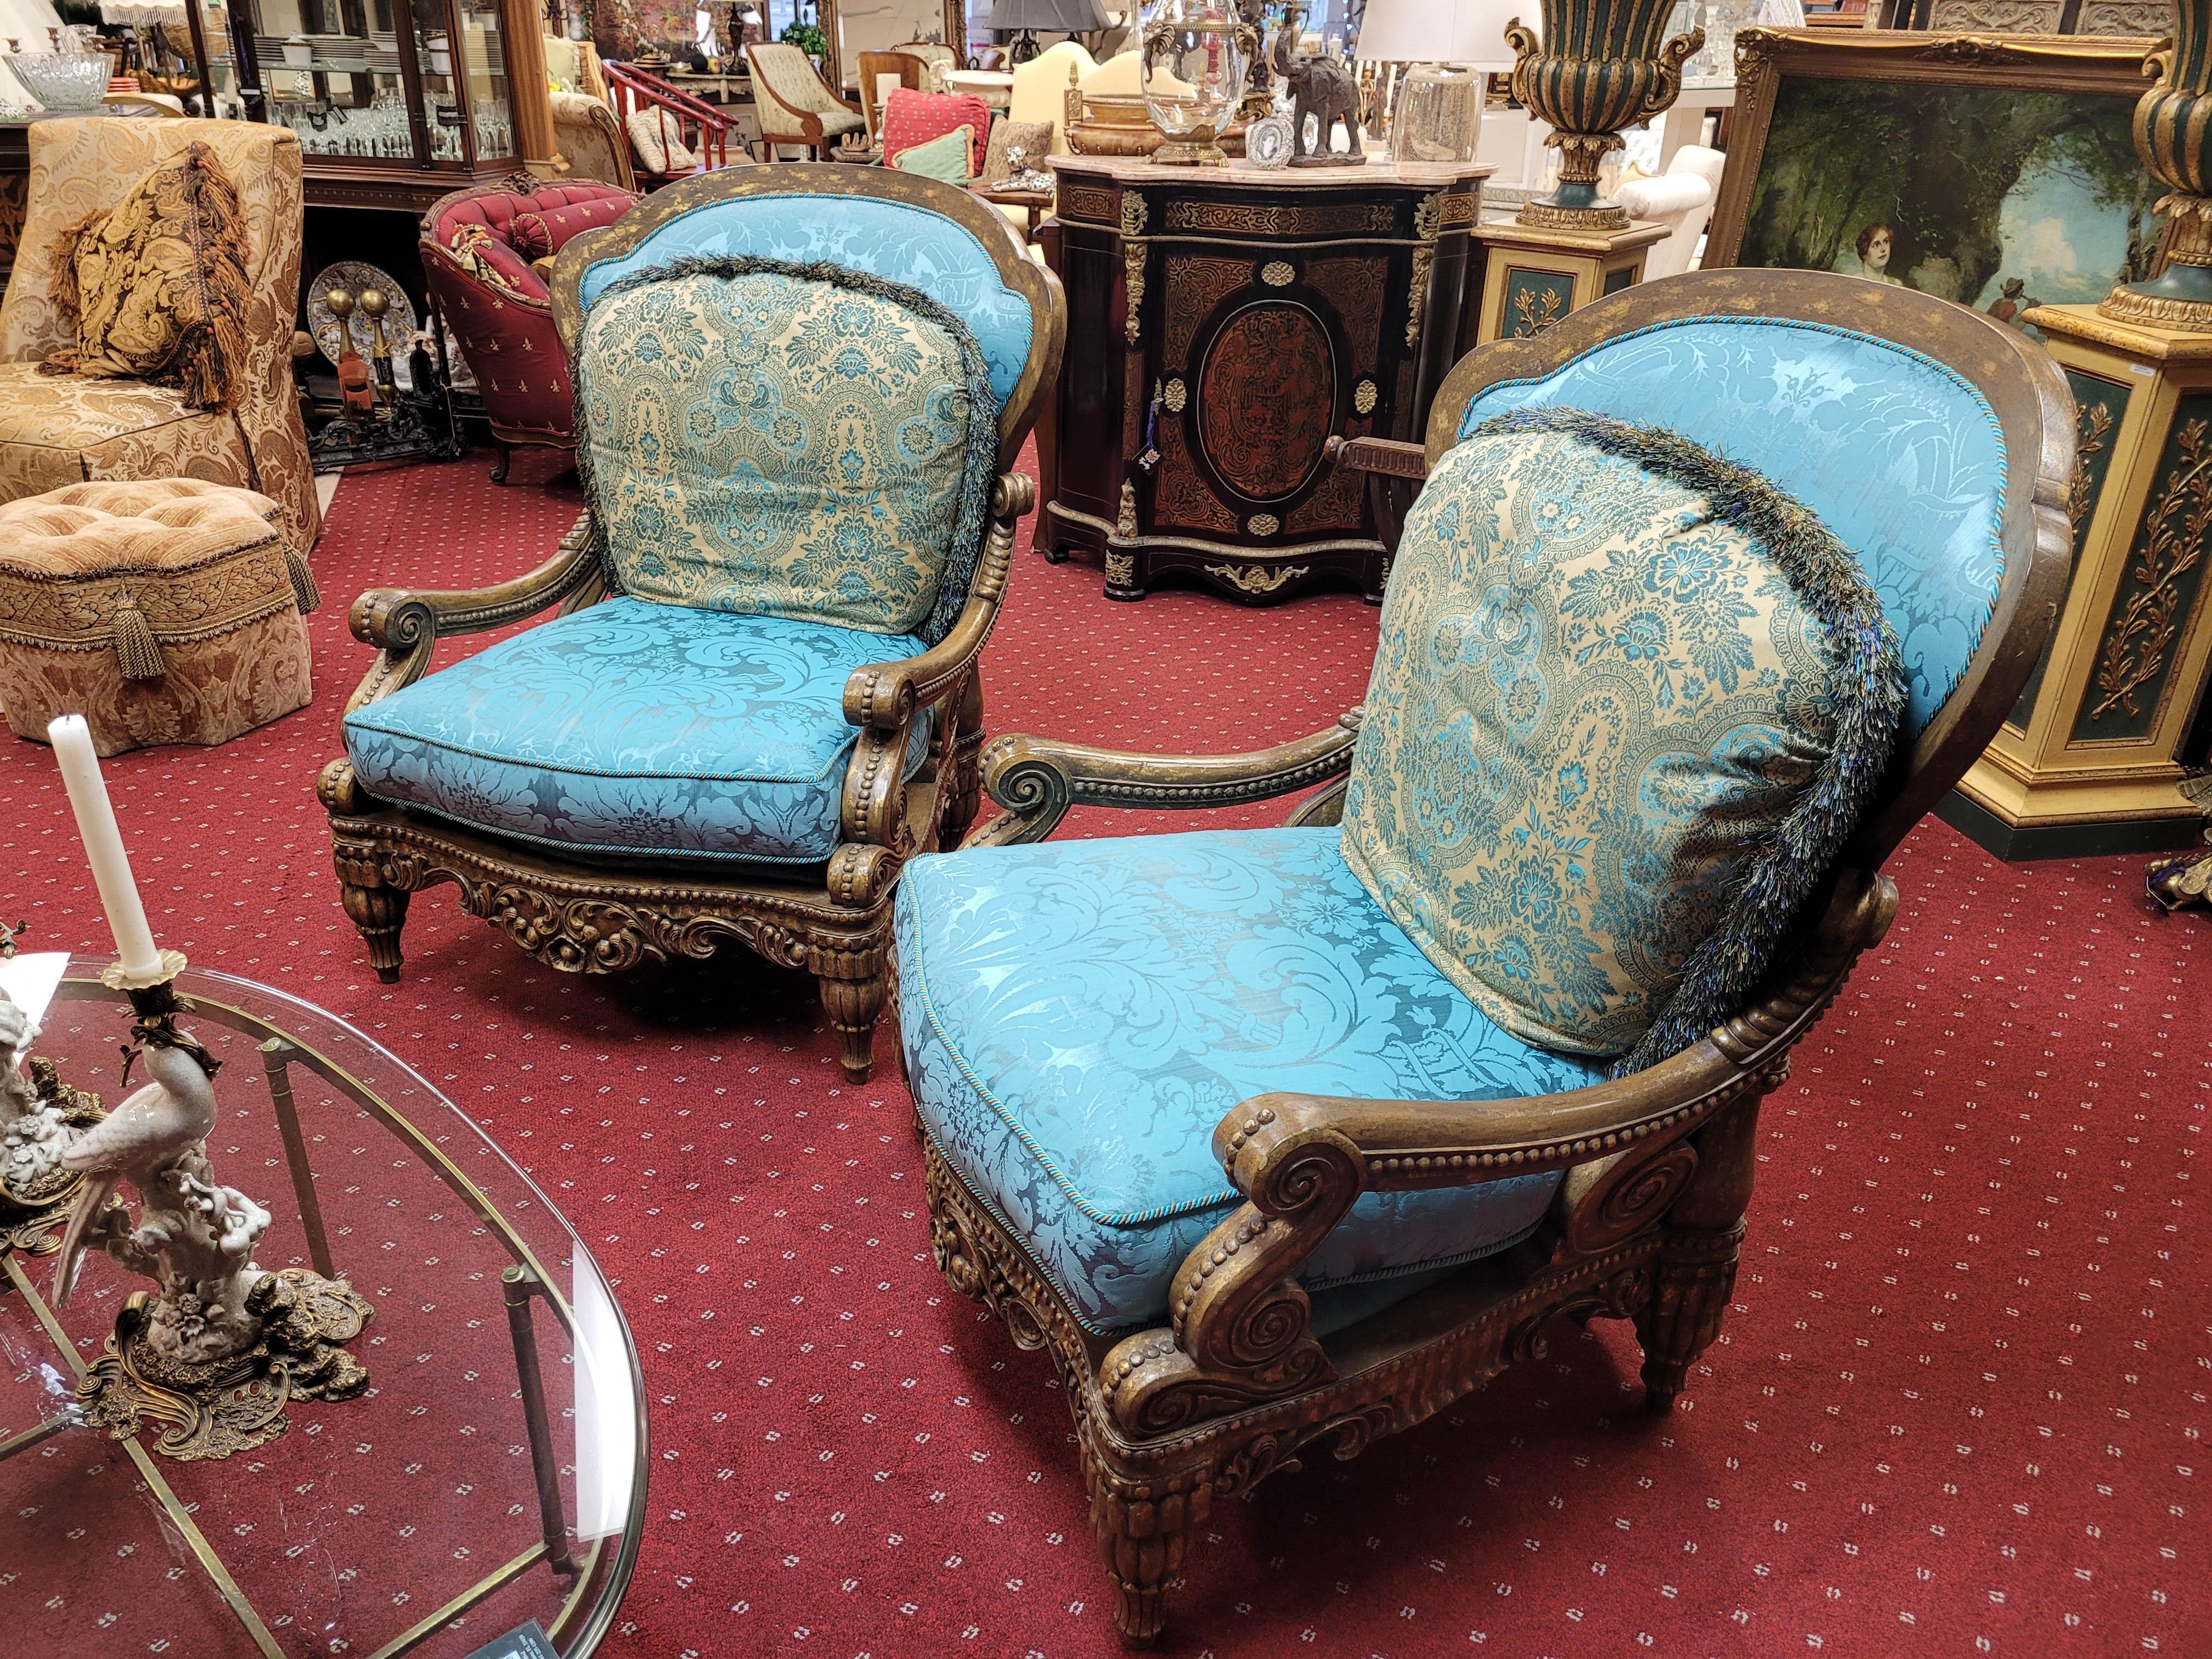 A gorgeous pair of baroque-styled oversized arm lounge chairs by Tomlinson, upholstered in a captivating iced blue sateen damask textile. The chairs feature a solid wood frame and are carved with intricate details finished in antiqued gold. Whether